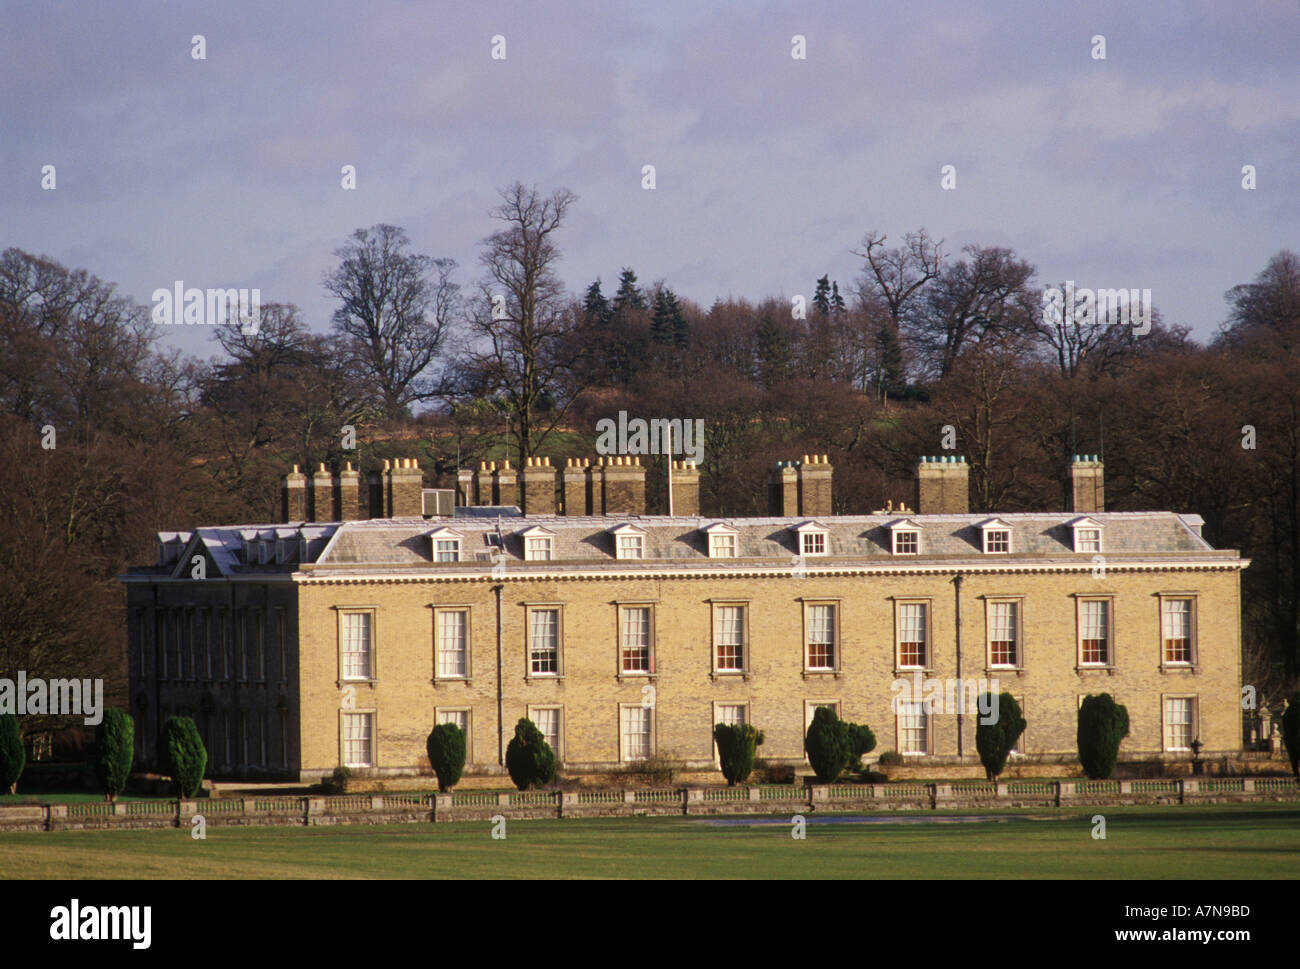 Althorp House family home of the Earl Spencer and the late Princess Diana of Wales. Great Brington Northamptonshire England 1997 1990s UK HOMER SYKES Stock Photo